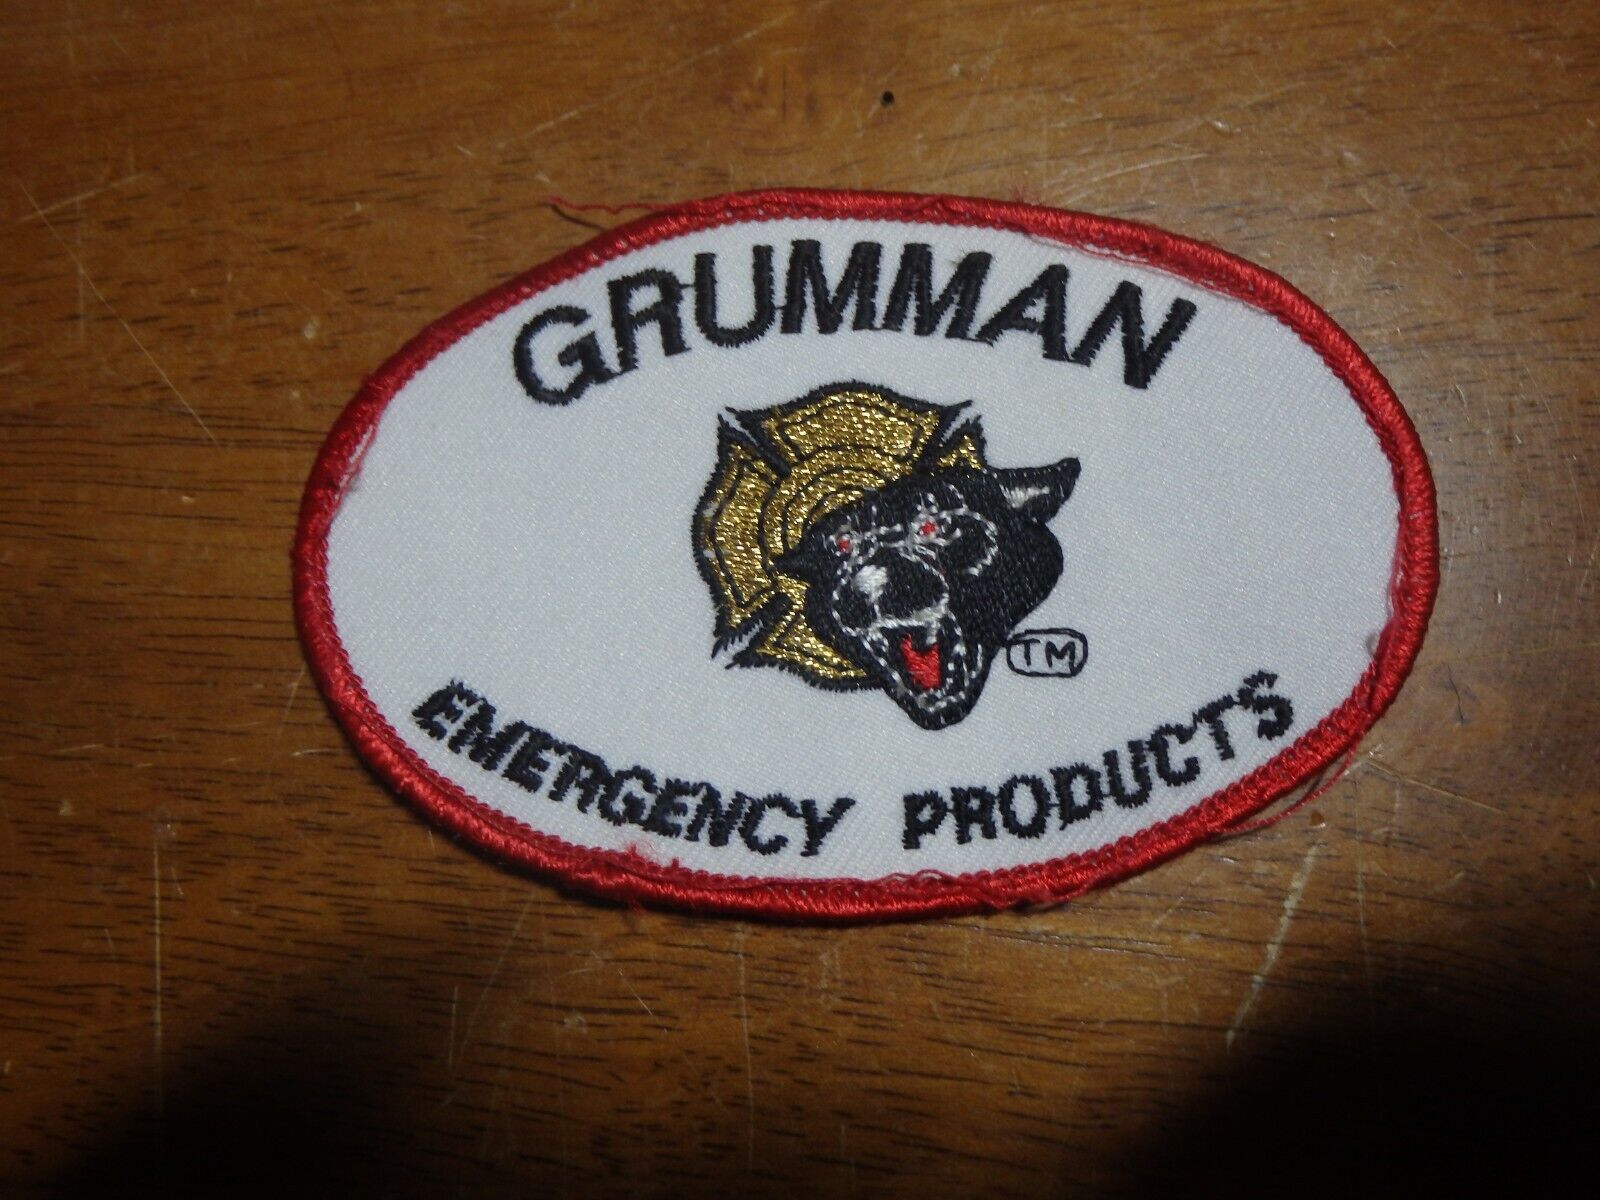 Grumman Emergency Products FIRE FIGHTER TRUCKS JAWS OF LIFE  PATCH  BX SS#2